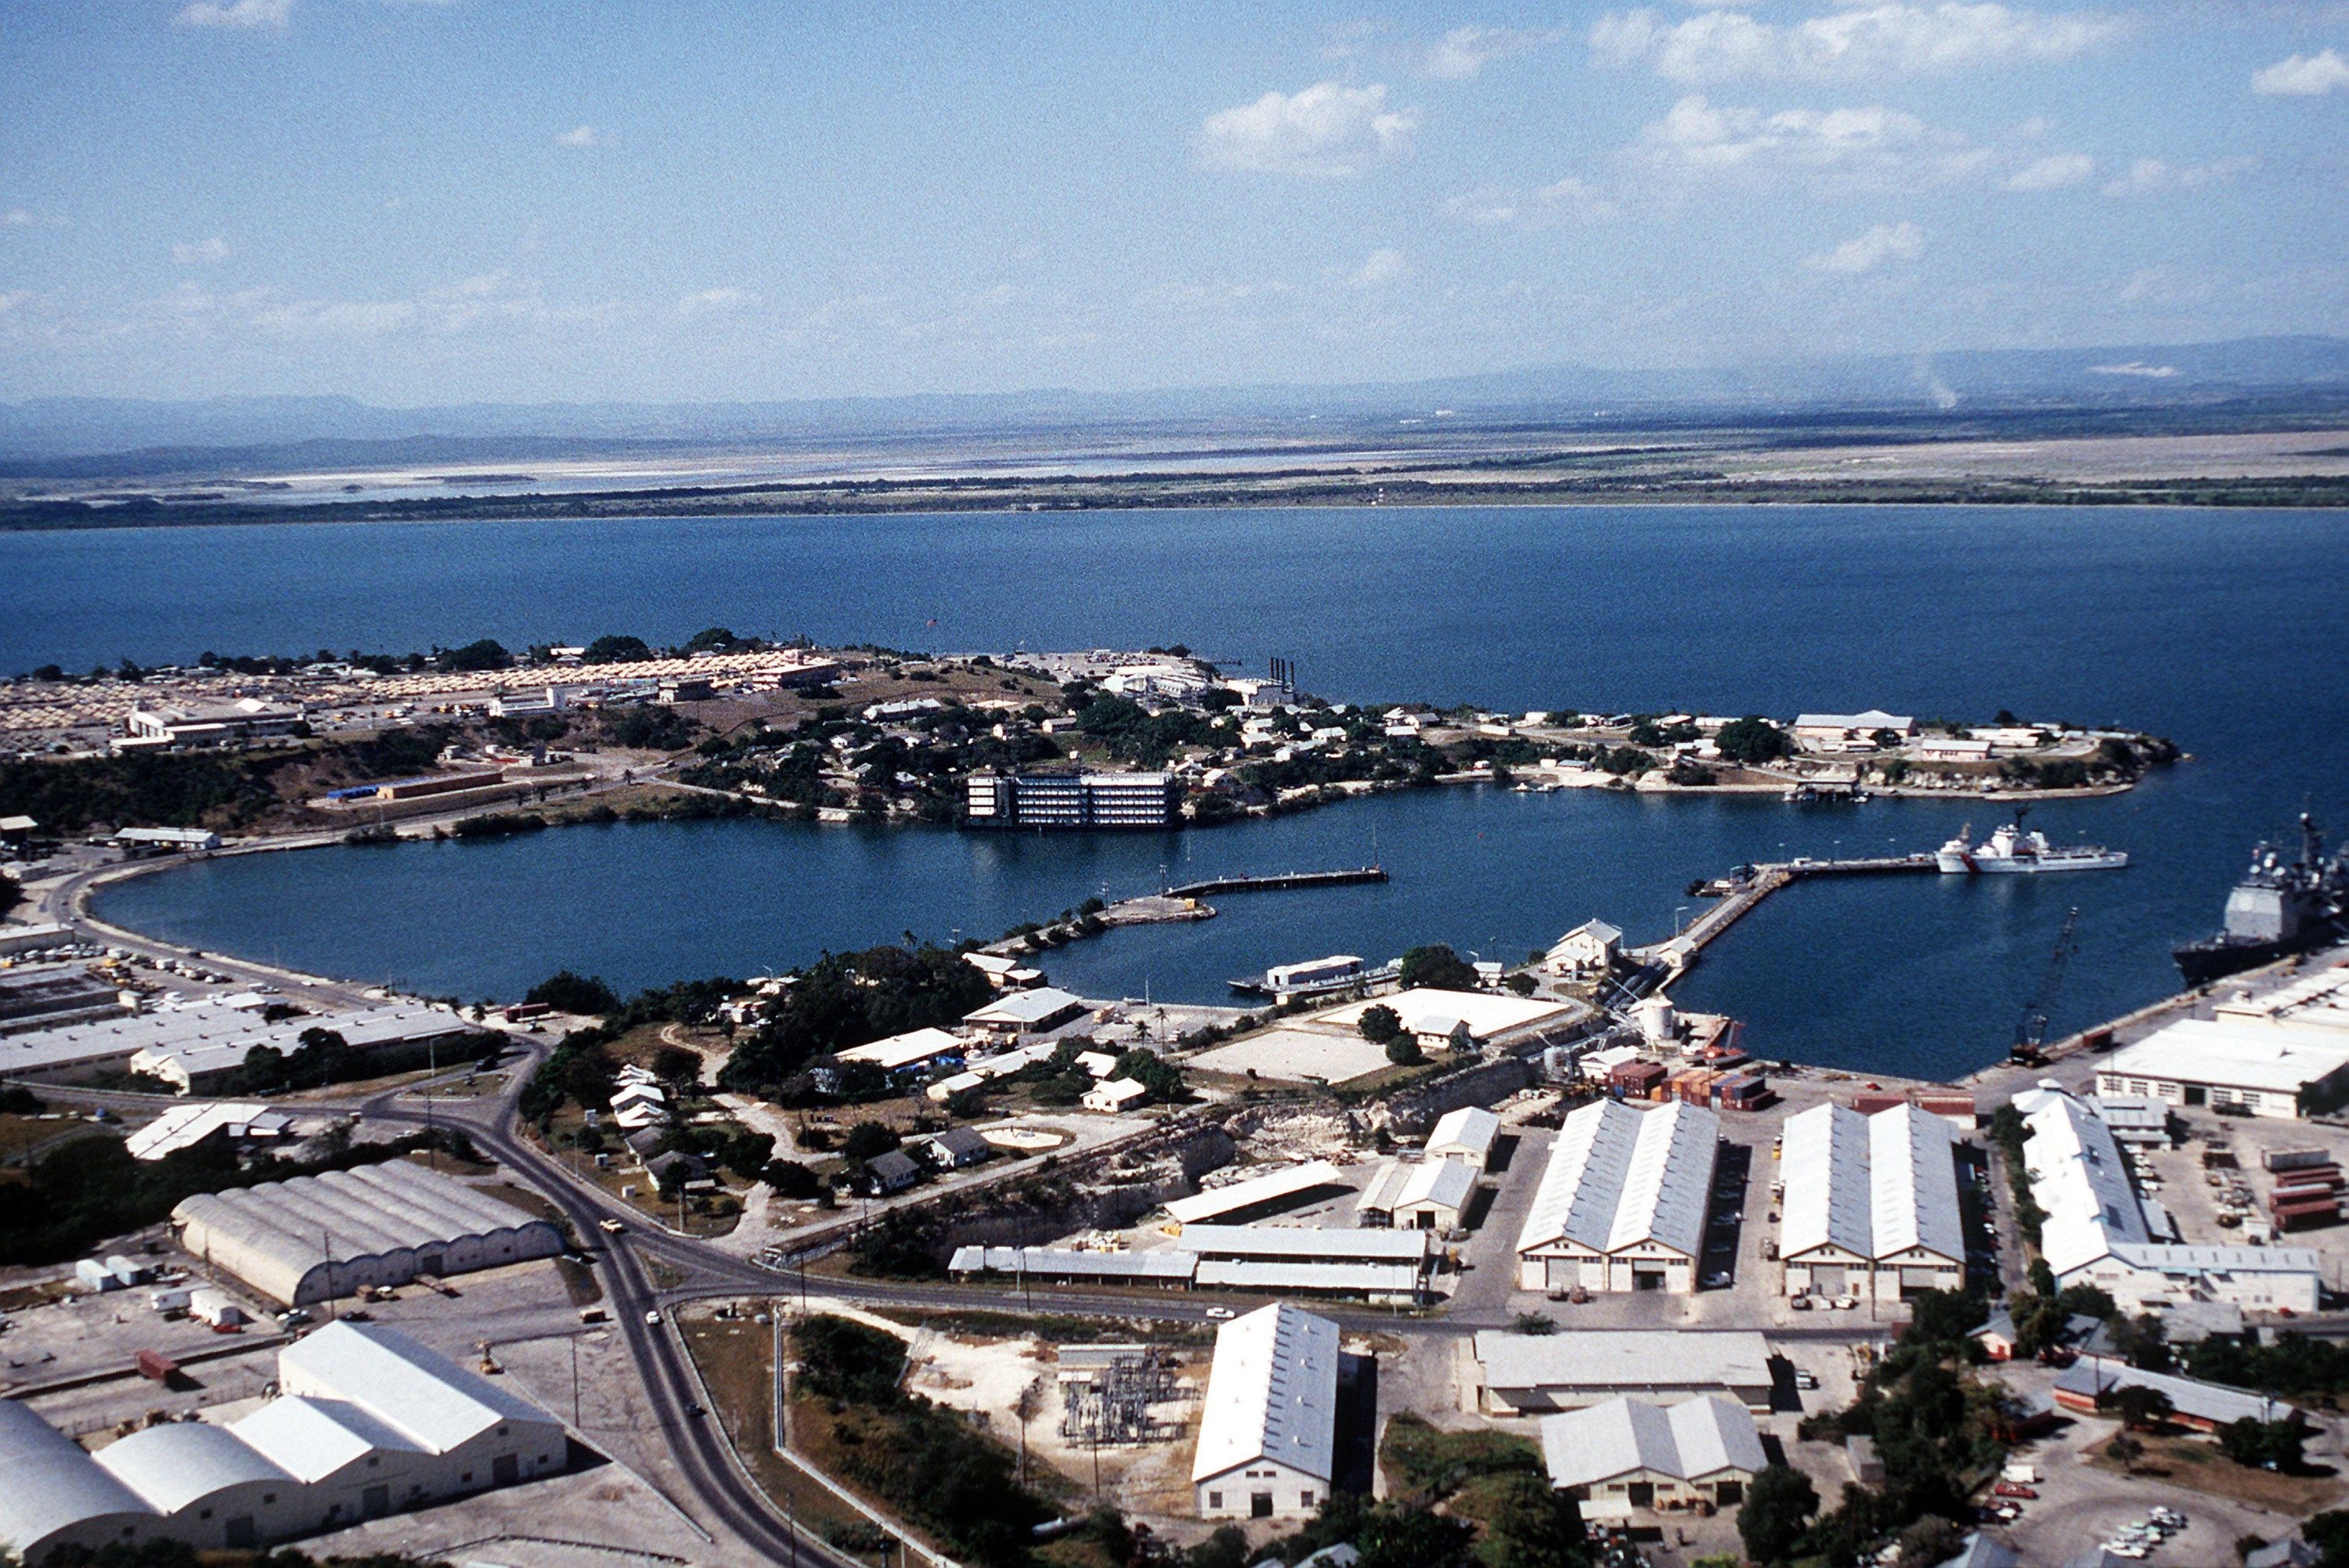 Aerial view of the Guantanamo Bay Naval Base. Image by Everett Collection / Shutterstock. United States, 1995.